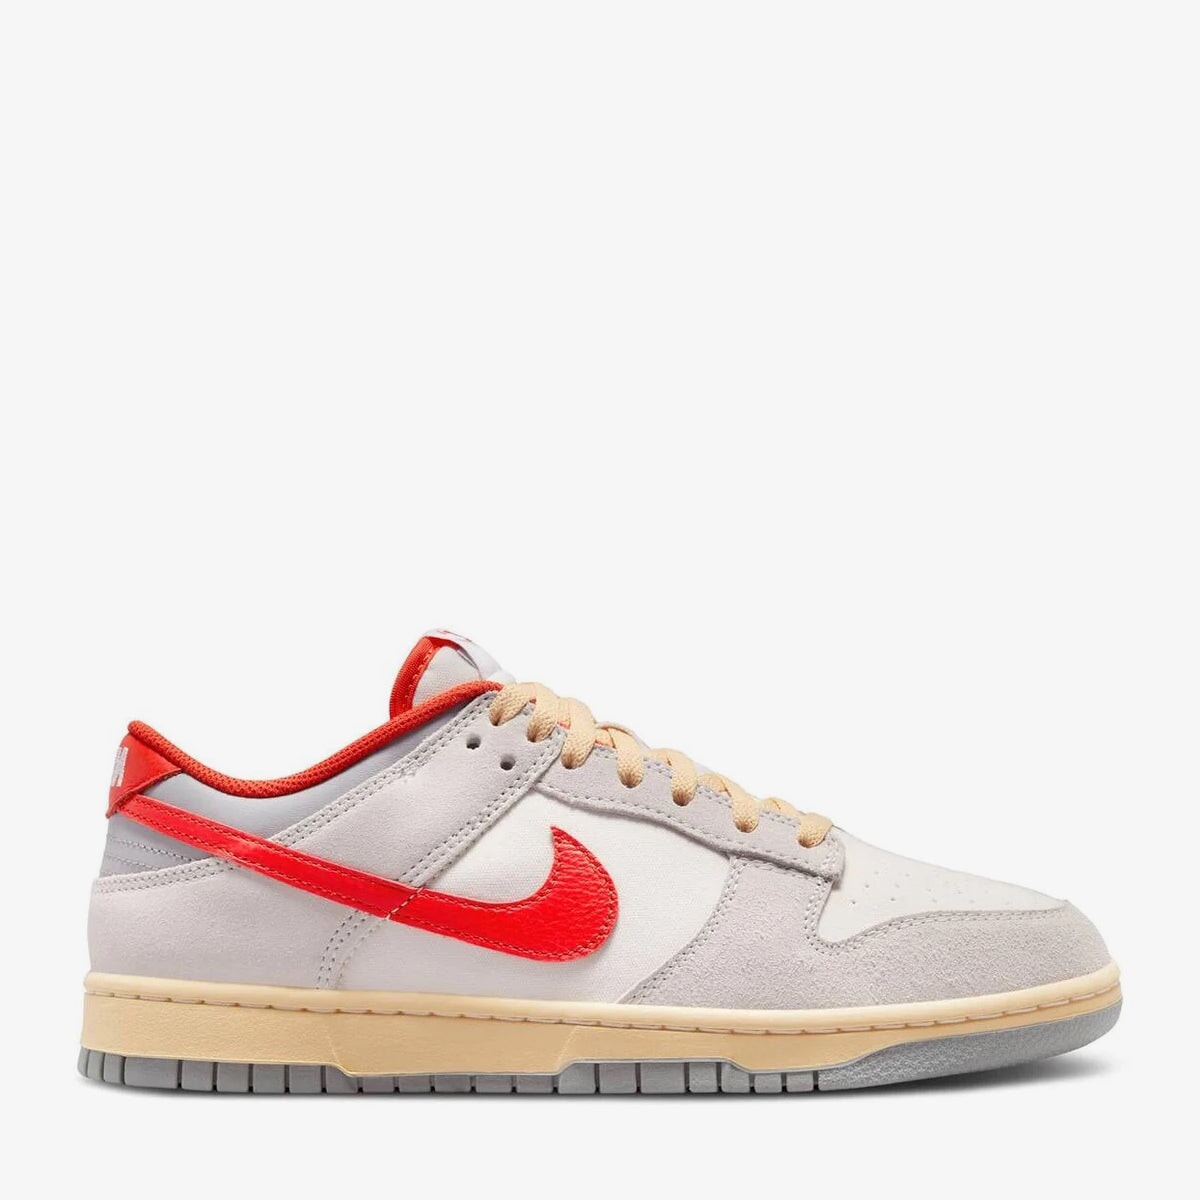 Nike Dunk Low “Red Photon Dust” Sneakers Nike